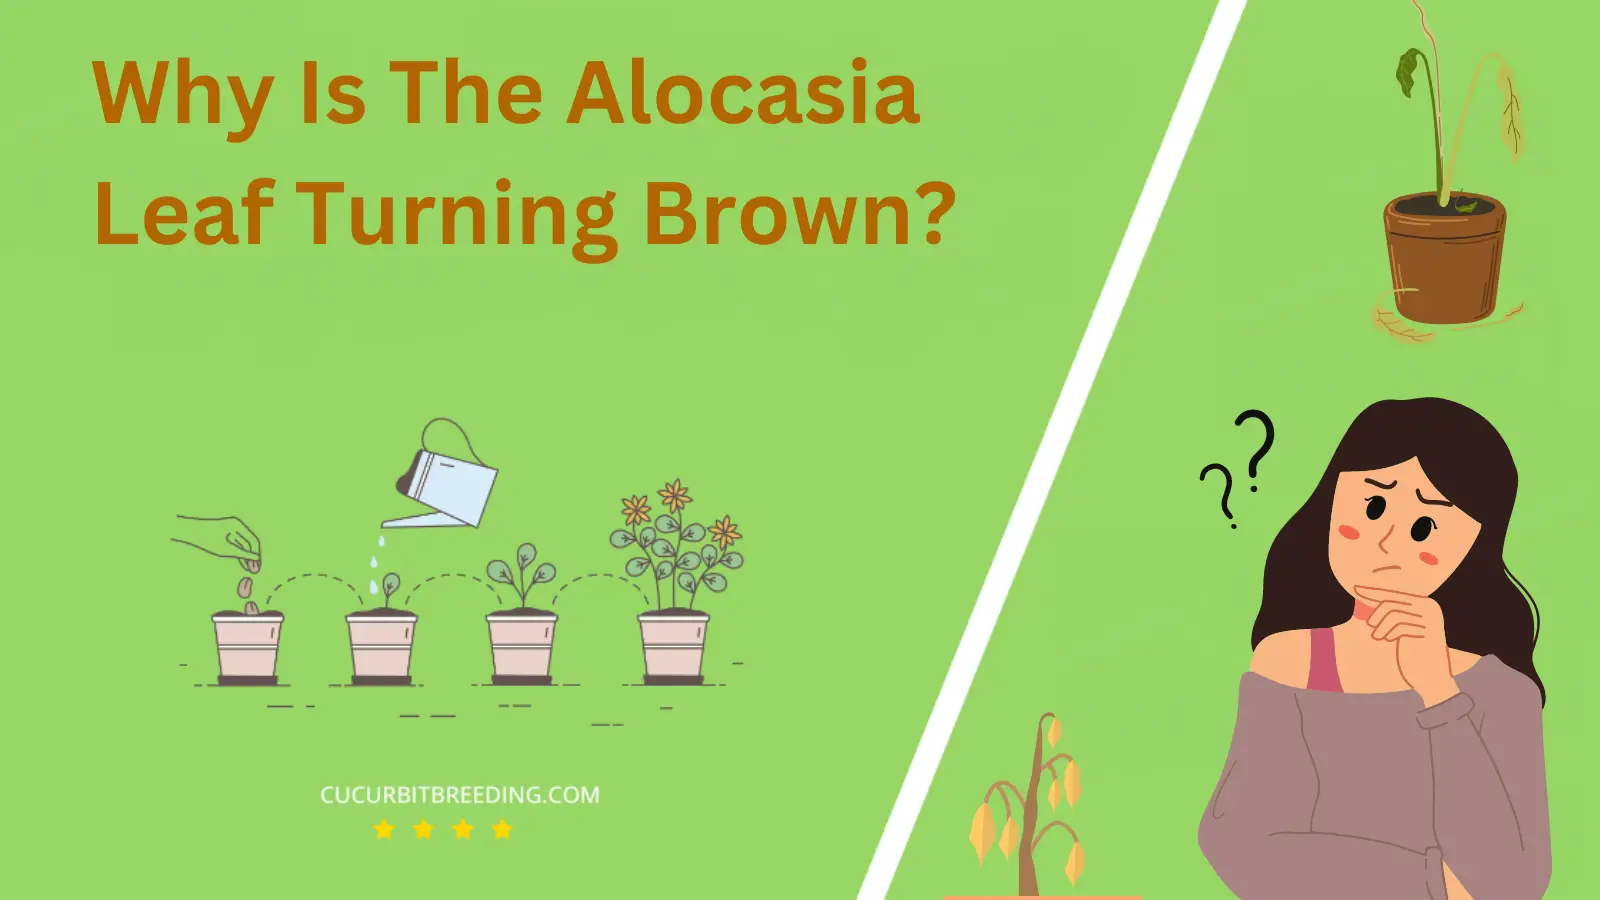 Why Is The Alocasia Leaf Turning Brown